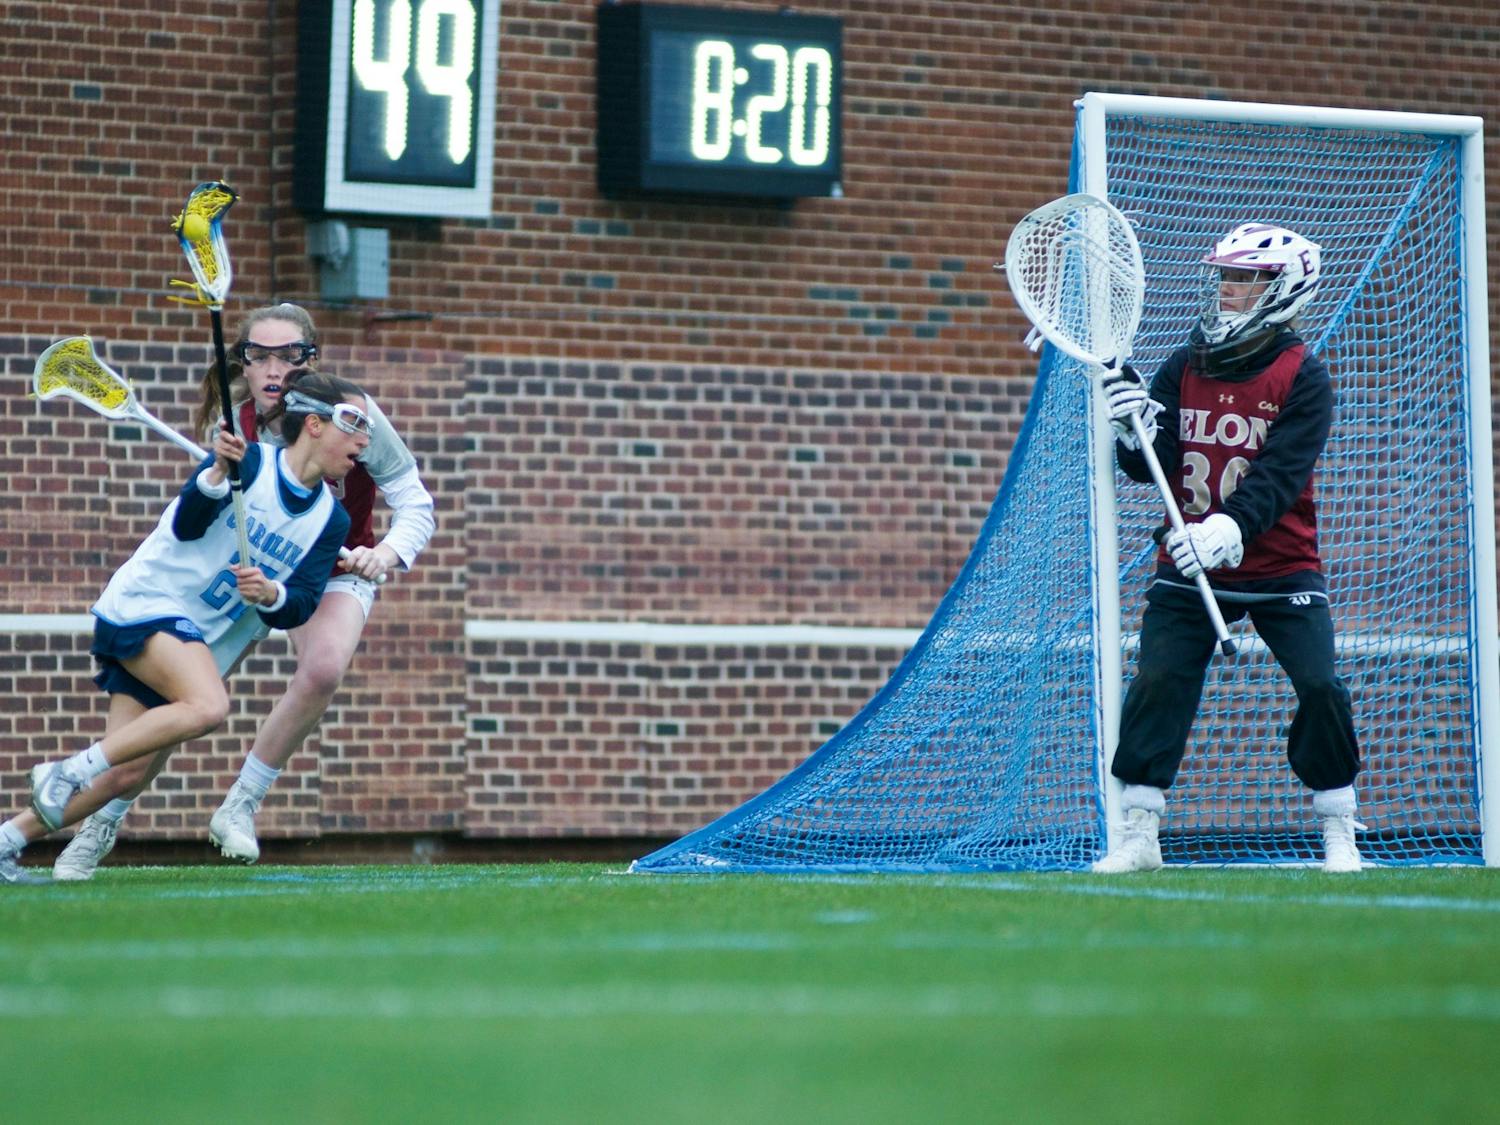 UNC senior midfielder Marisa Divietro (27) charges past Elon freshman defender Hannah Mccarthy (7) to attempt a shot on goal. The Tar Heels would start off the season with a 20-3 victory over Elon during the exhibition match on Feb. 1, 2020, at Dorrance Field. 